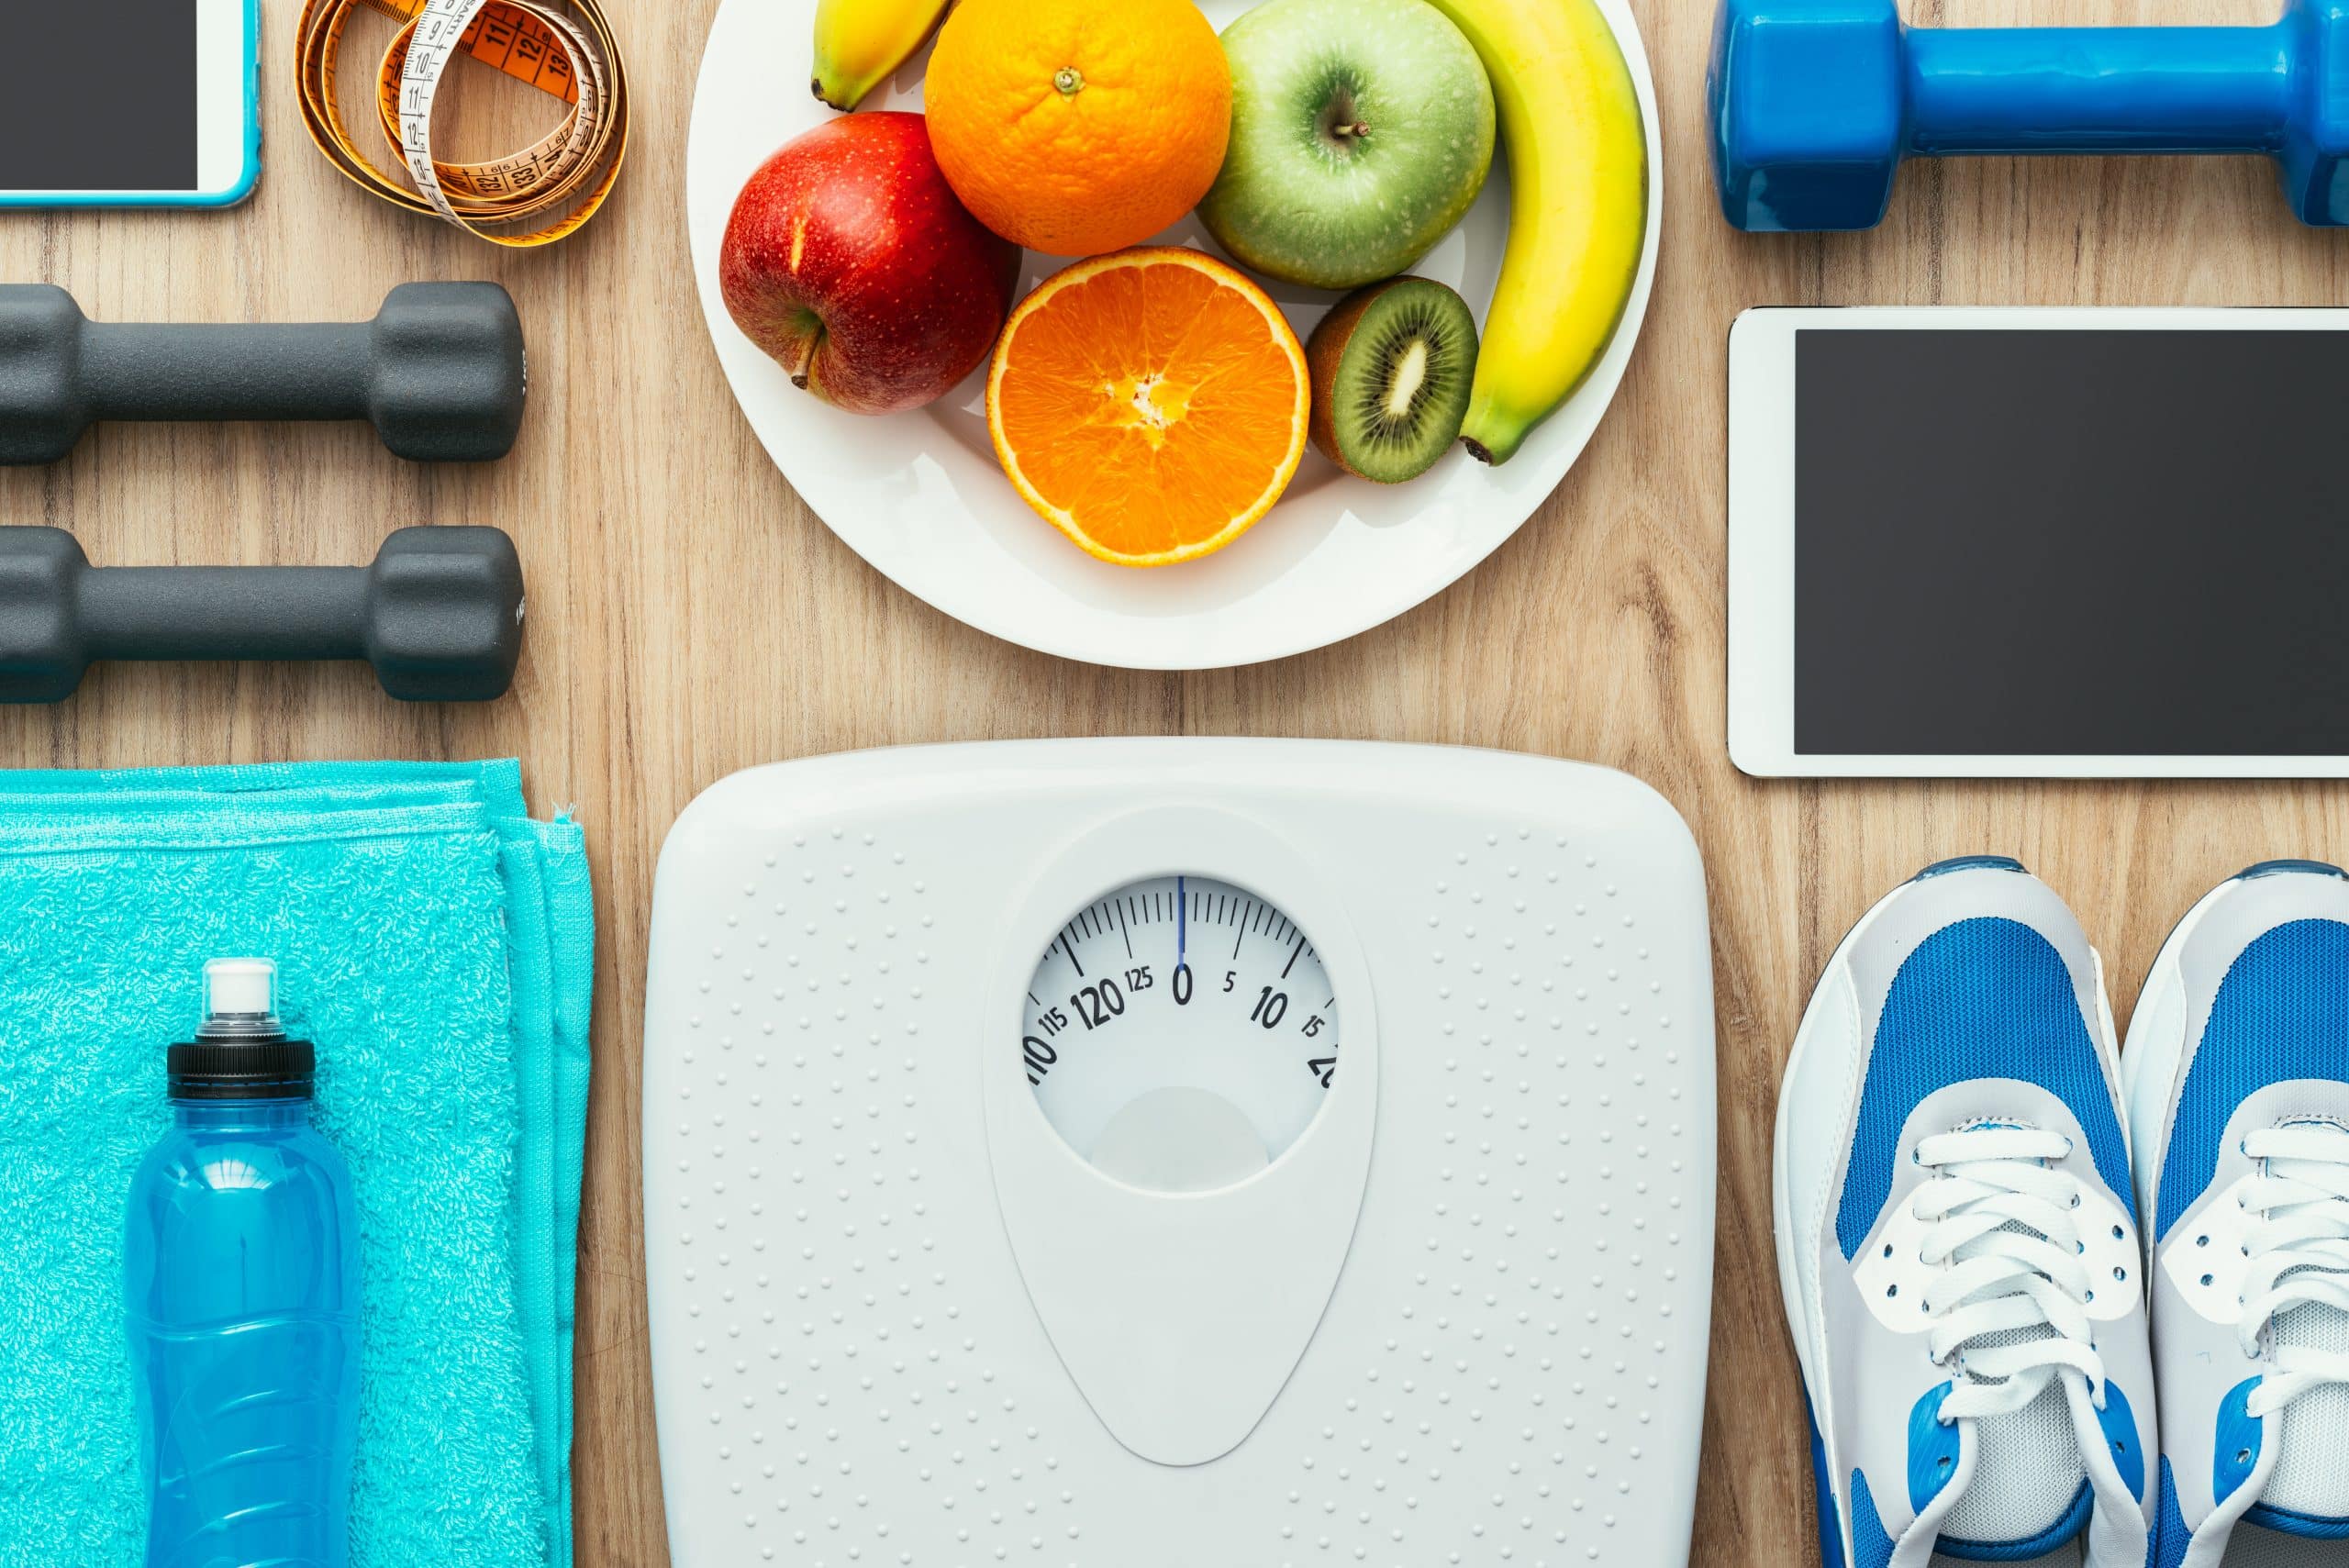 Pictured is a blue water bottle, a bright blue towel, a white scale, a pair of blue and white tennis shoes, an electronic tablet, a set of black weights, a blue weight, a plate of fruits including an orance, a red apple, a greem apple, and a banana, a cell phone, and a measuring tape. This image is included in Passive Income MDs Saturday Syndication with White Coat Investor, titled "5 Ways that Weight Loss is Like Investing."